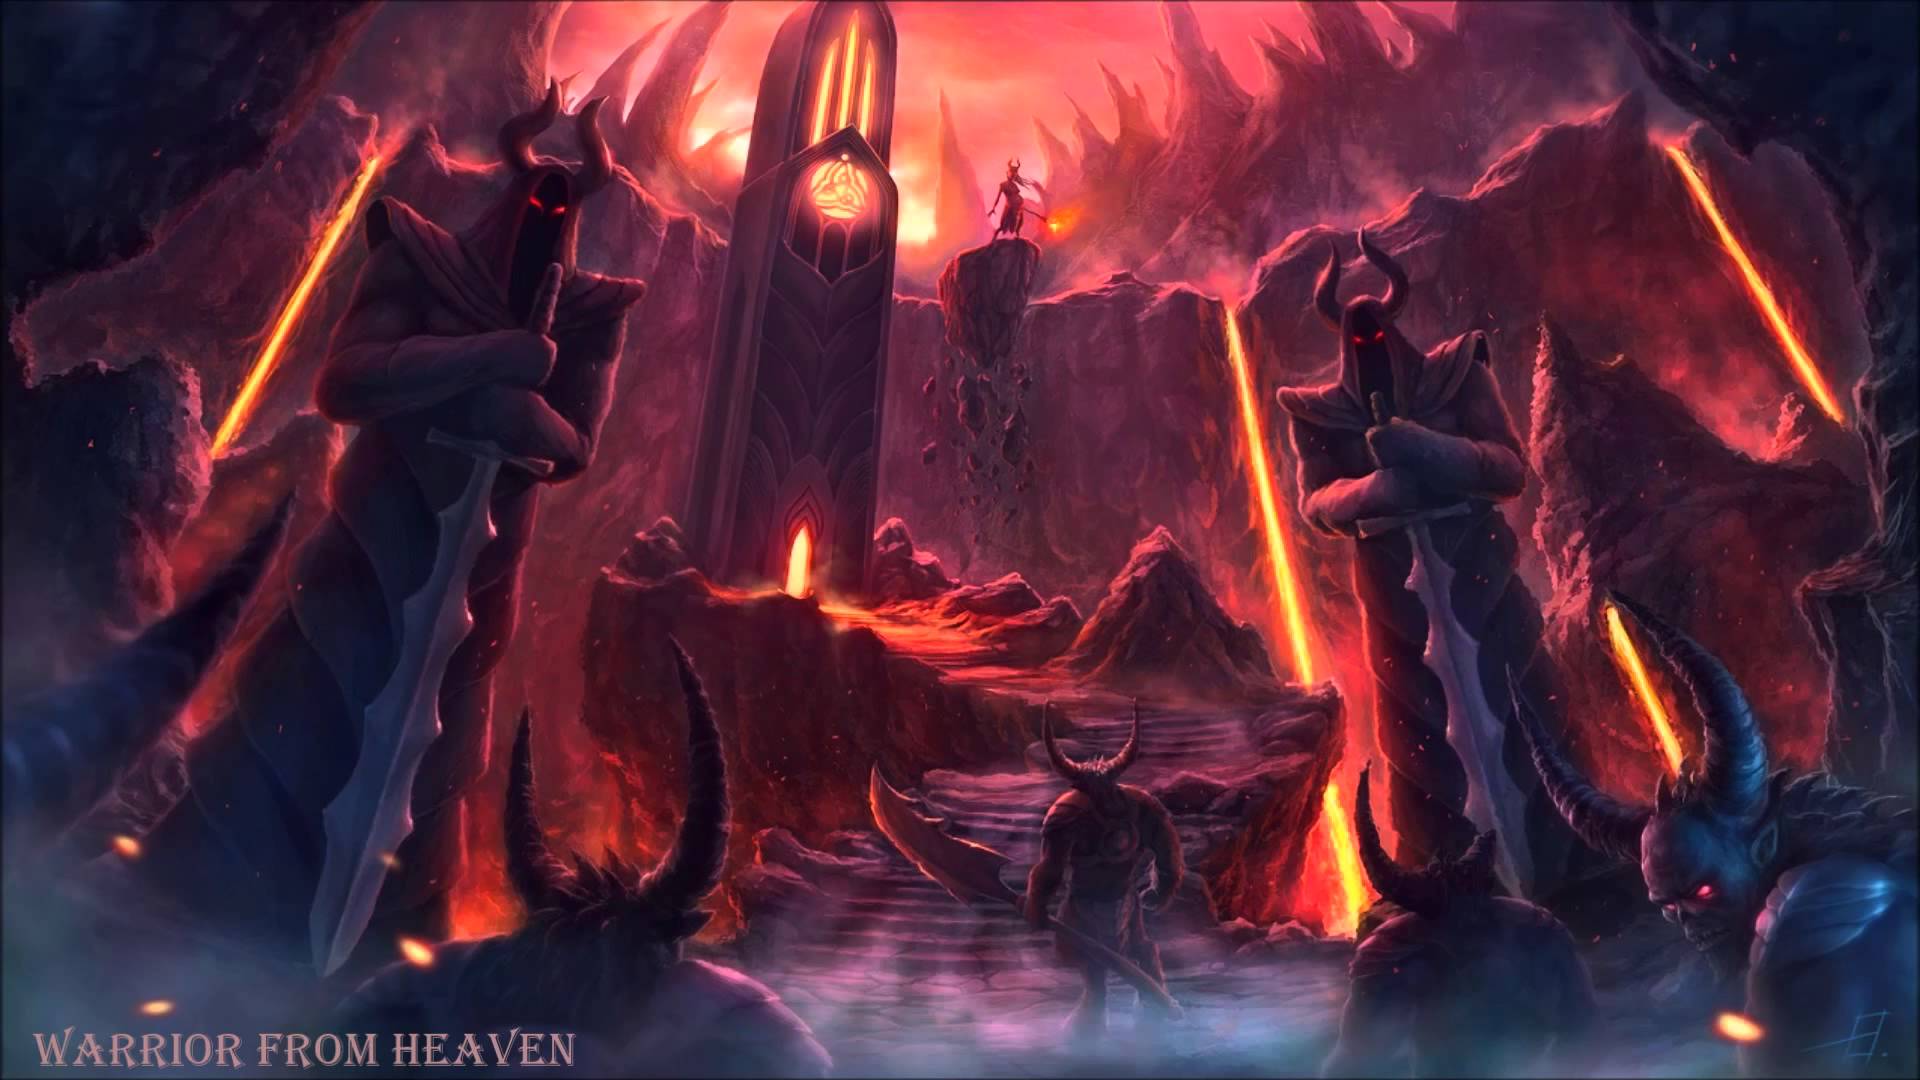 Hd Wallpapers The Gates Of Hell Wallpaper Cave